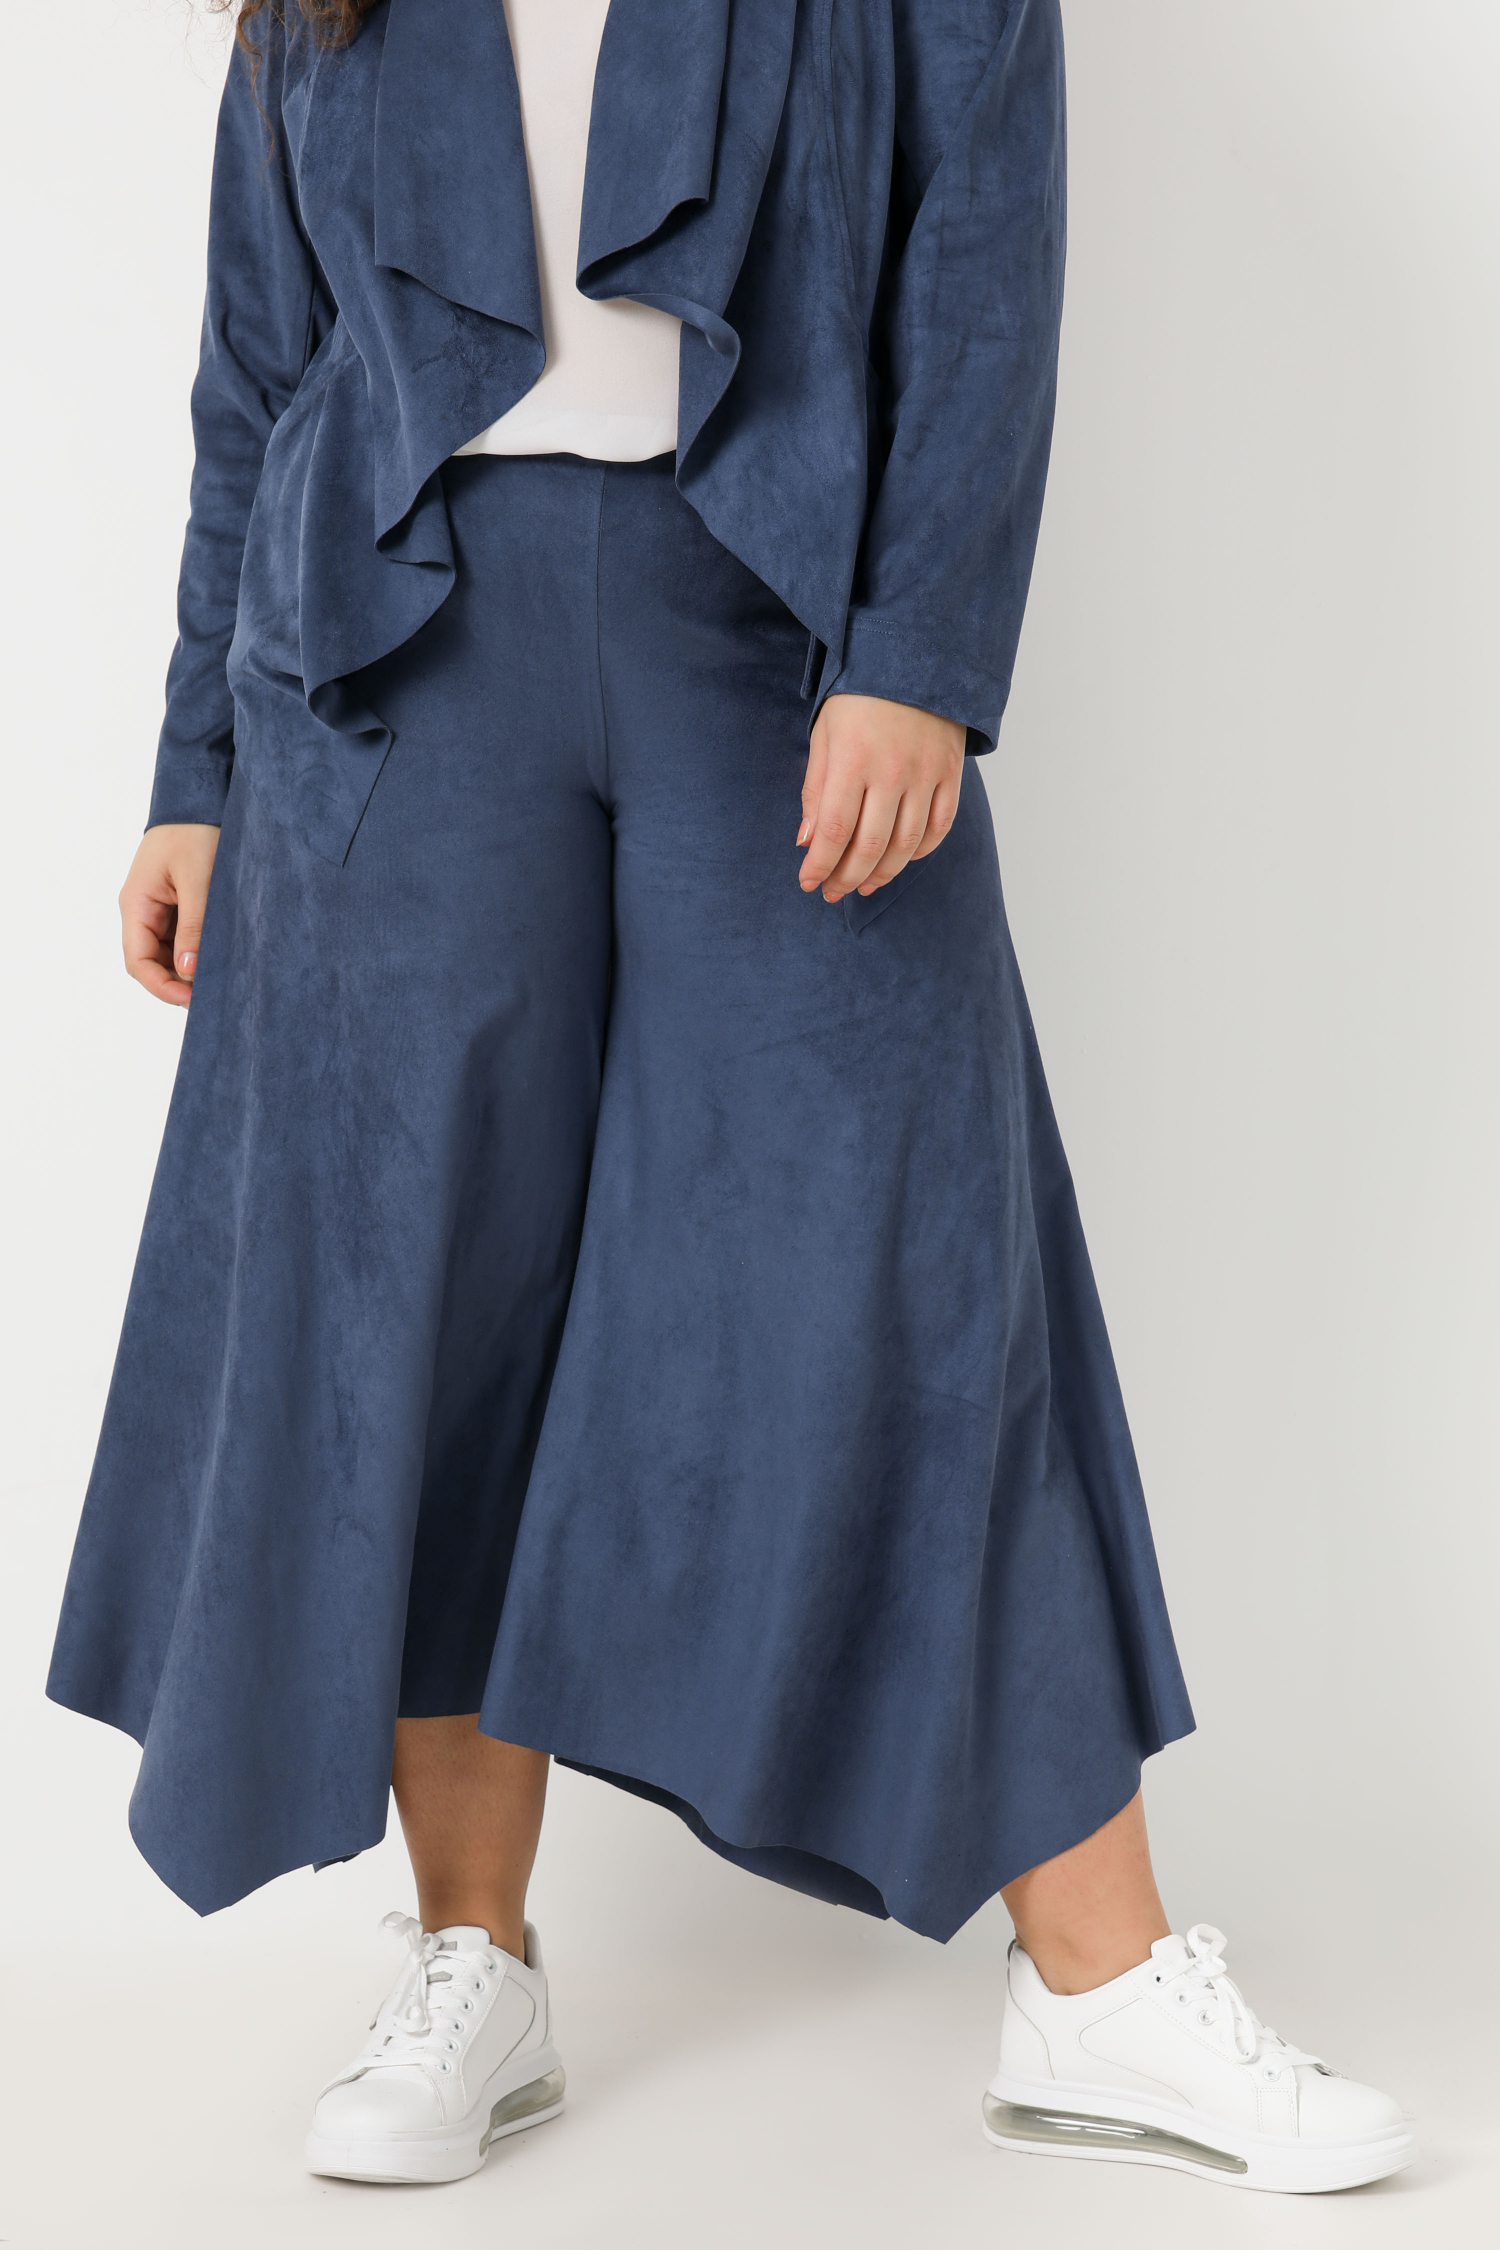 Suede effect culotte pants (shipping January 25/31)